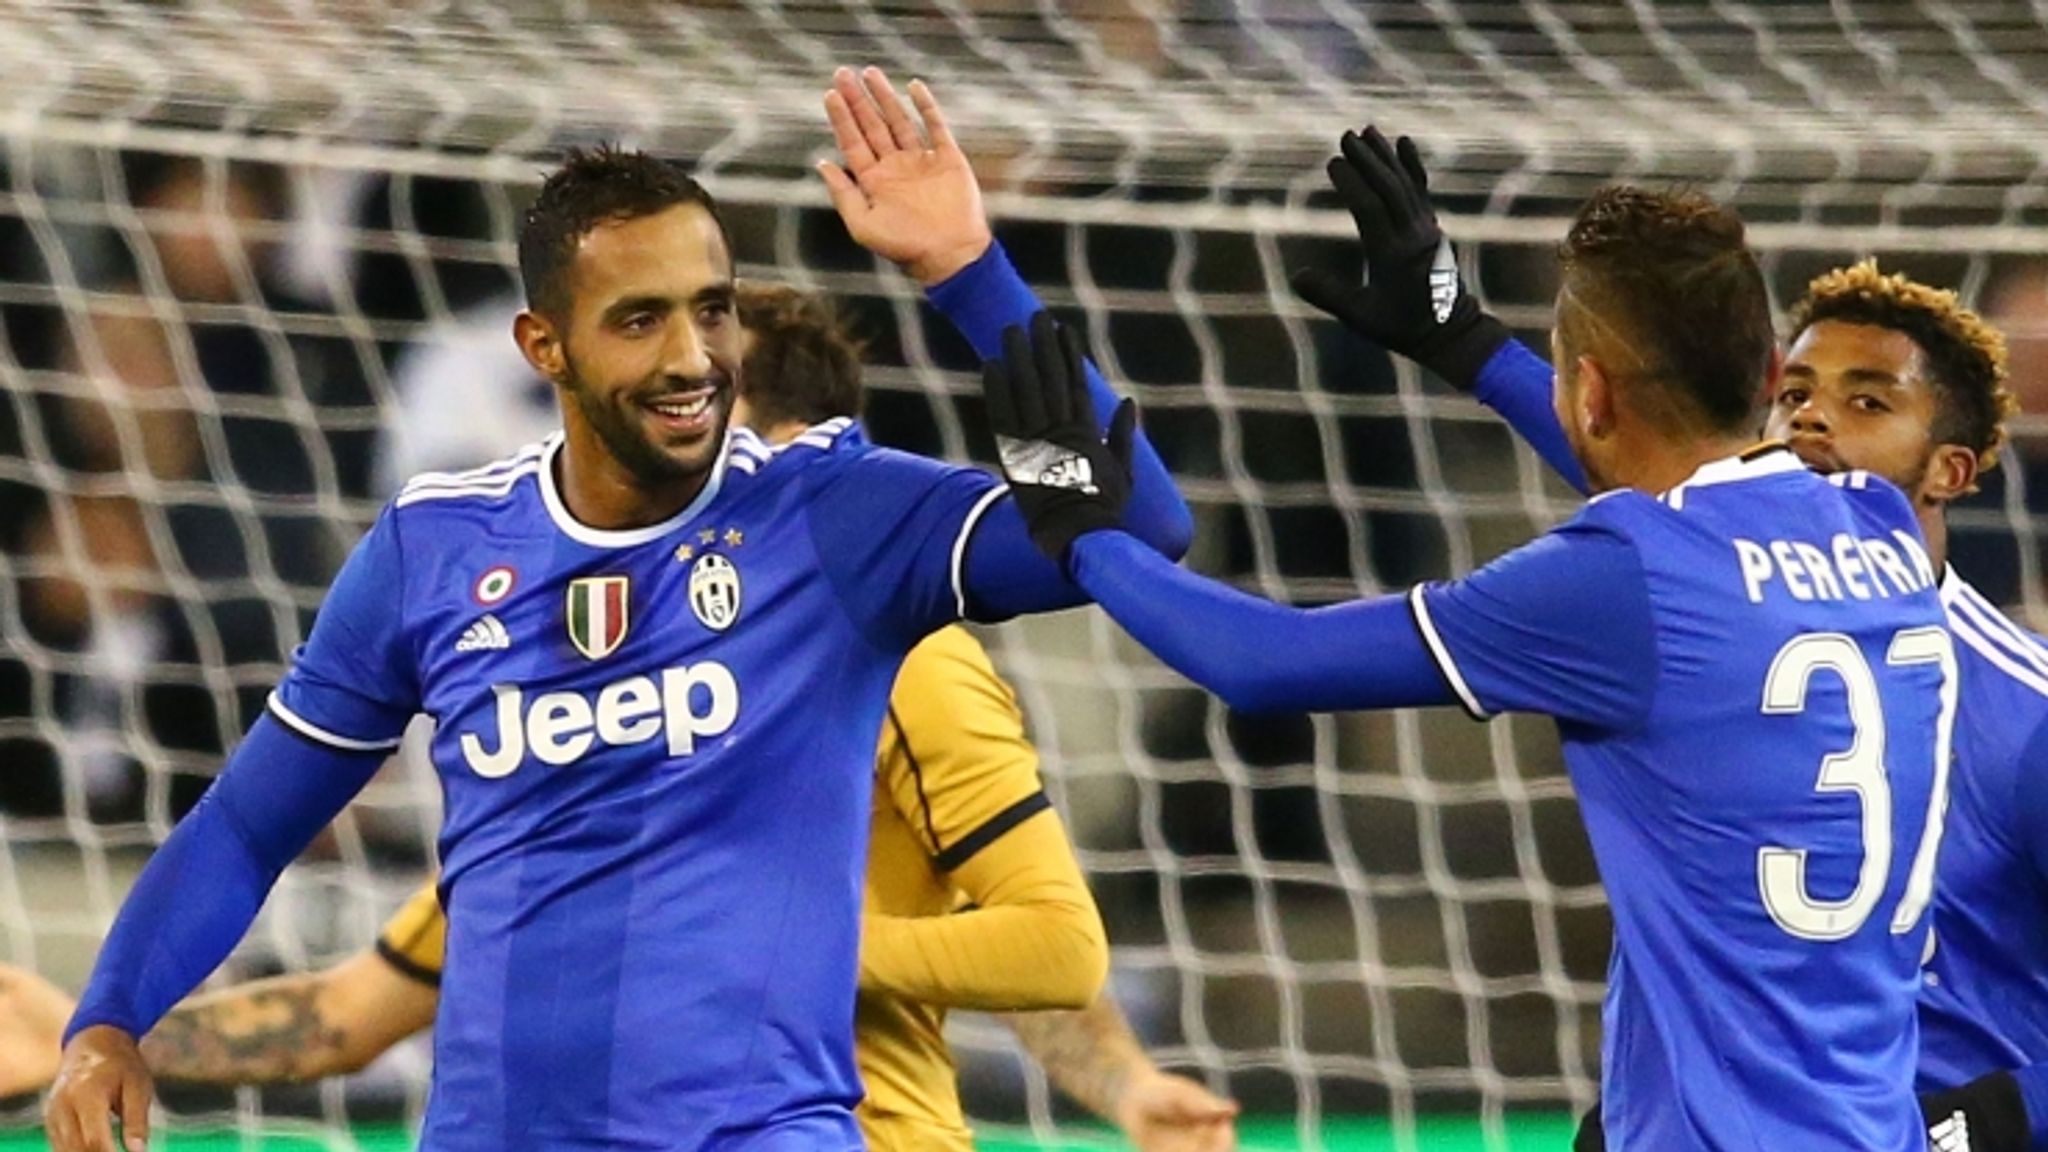 SPARTAK MOSCOW - Attempt for Juventus\' BENATIA ready: chances are low -  Ghana Latest Football News, Live Scores, Results - GHANAsoccernet